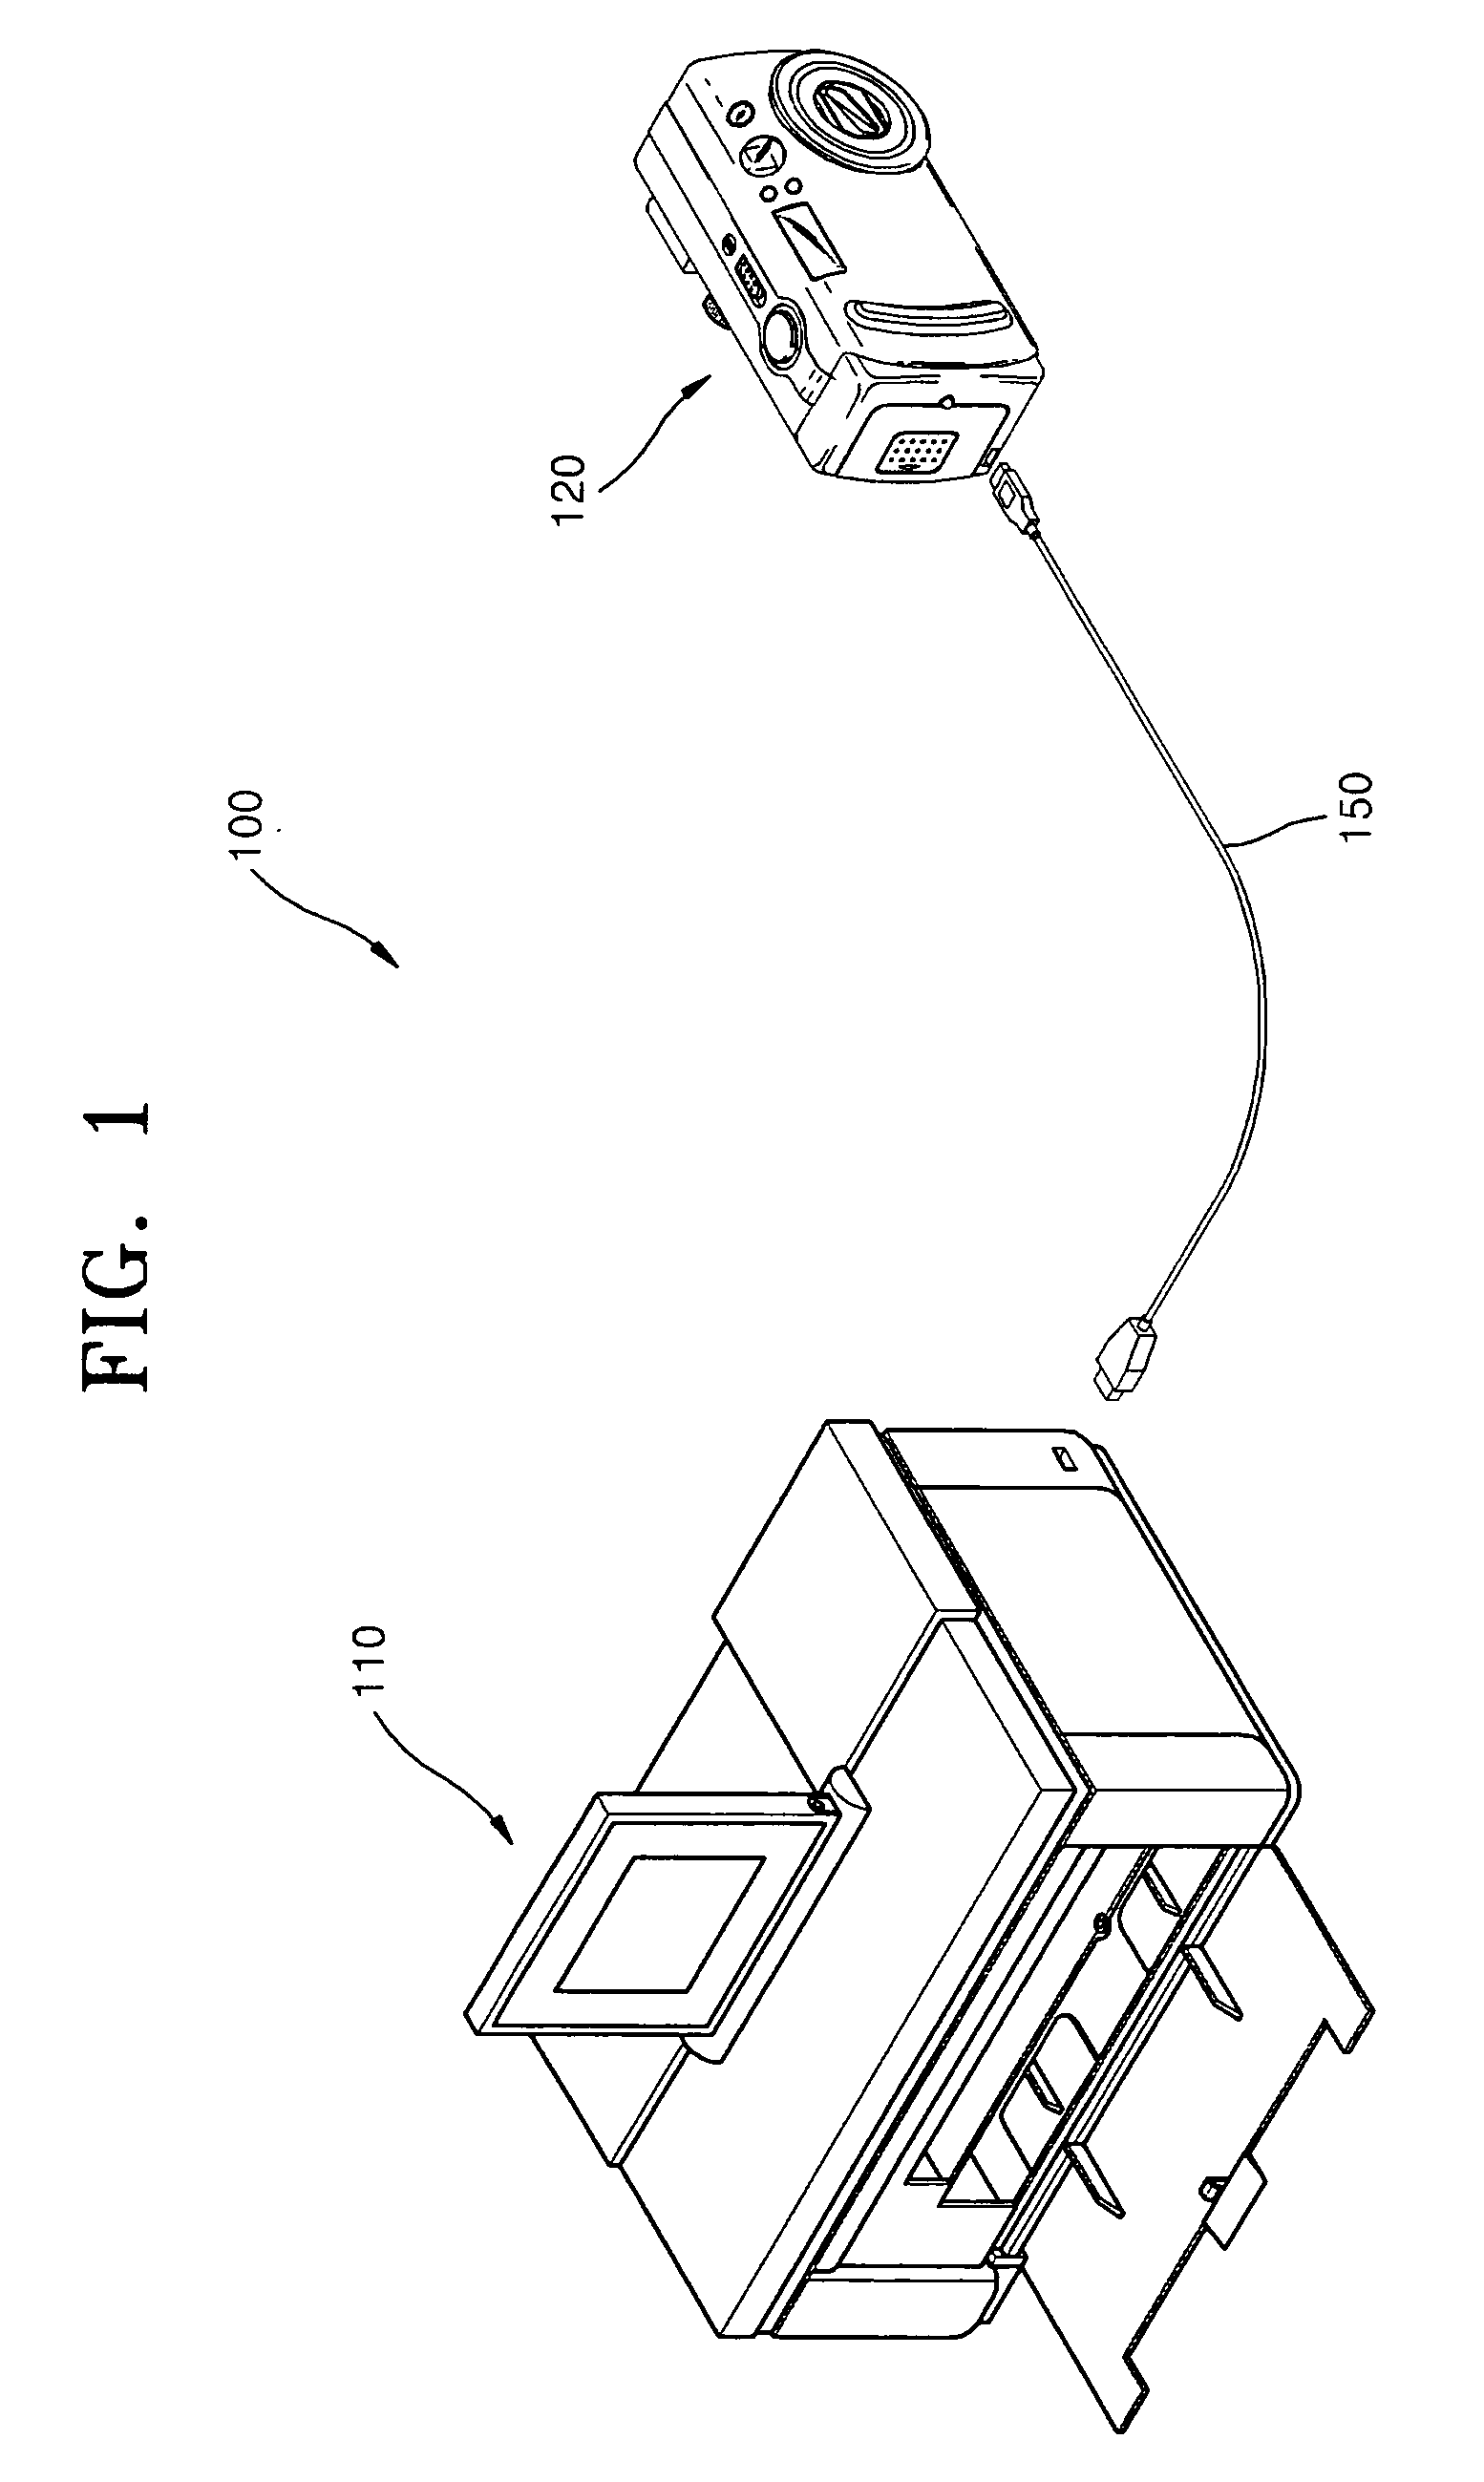 Printing method of image and photo-printing system and digital camera adapted for the same